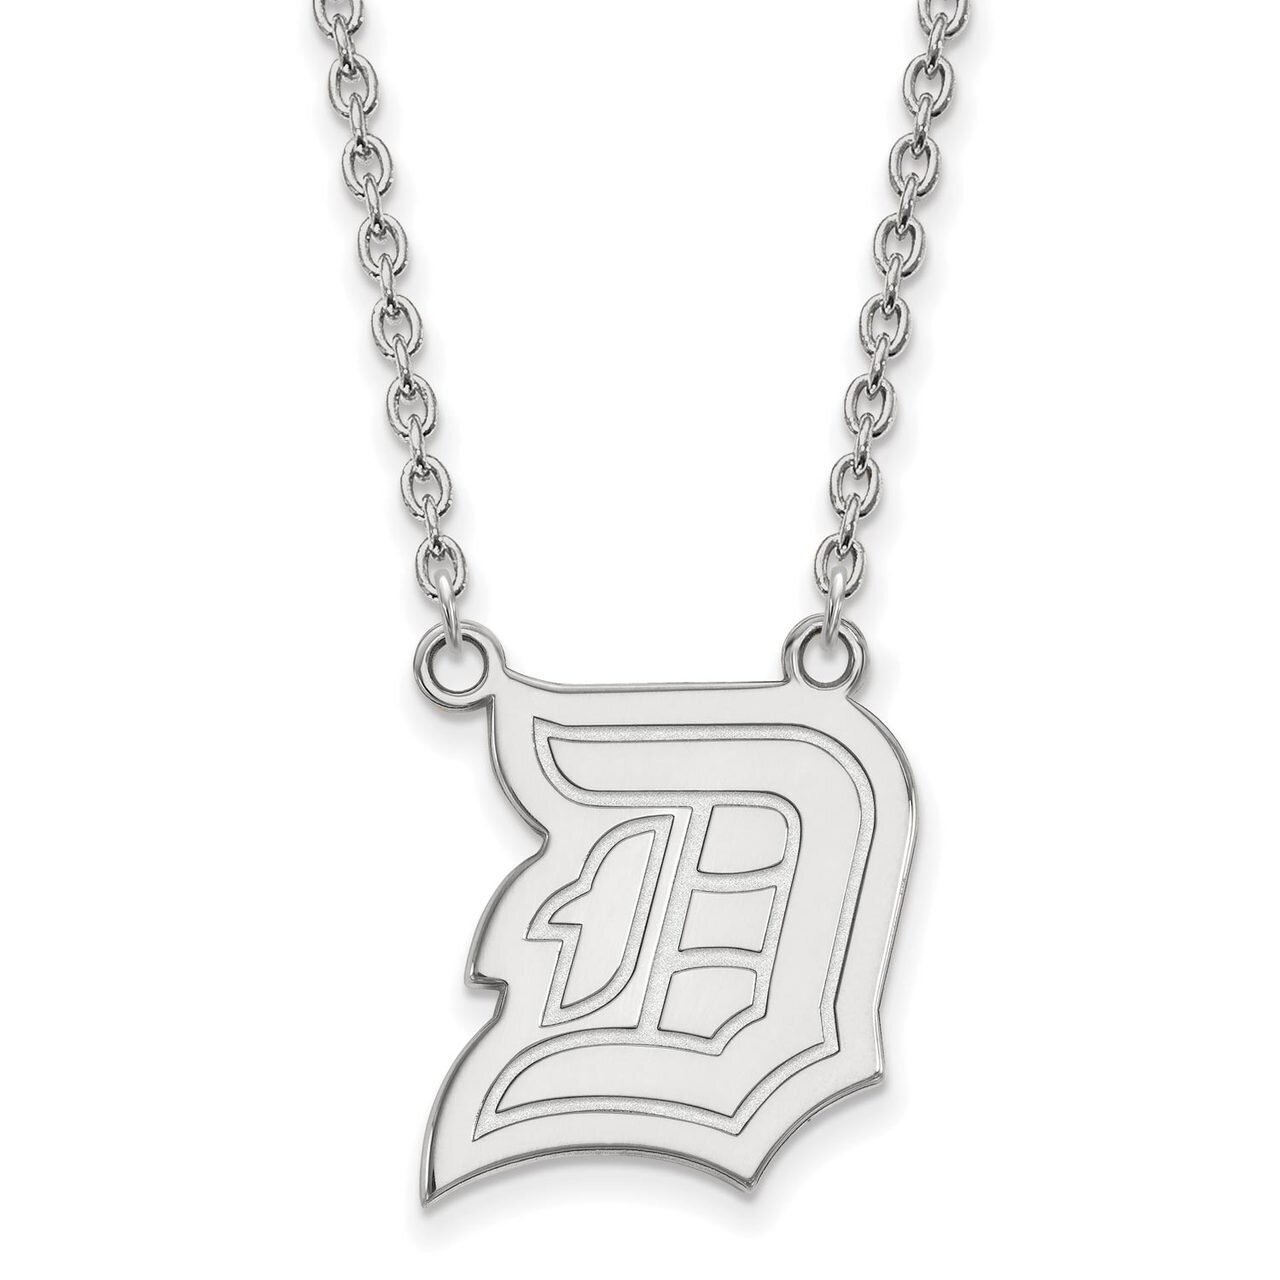 Duquesne University Large Pendant with Chain Necklace 10k White Gold 1W007DUU-18